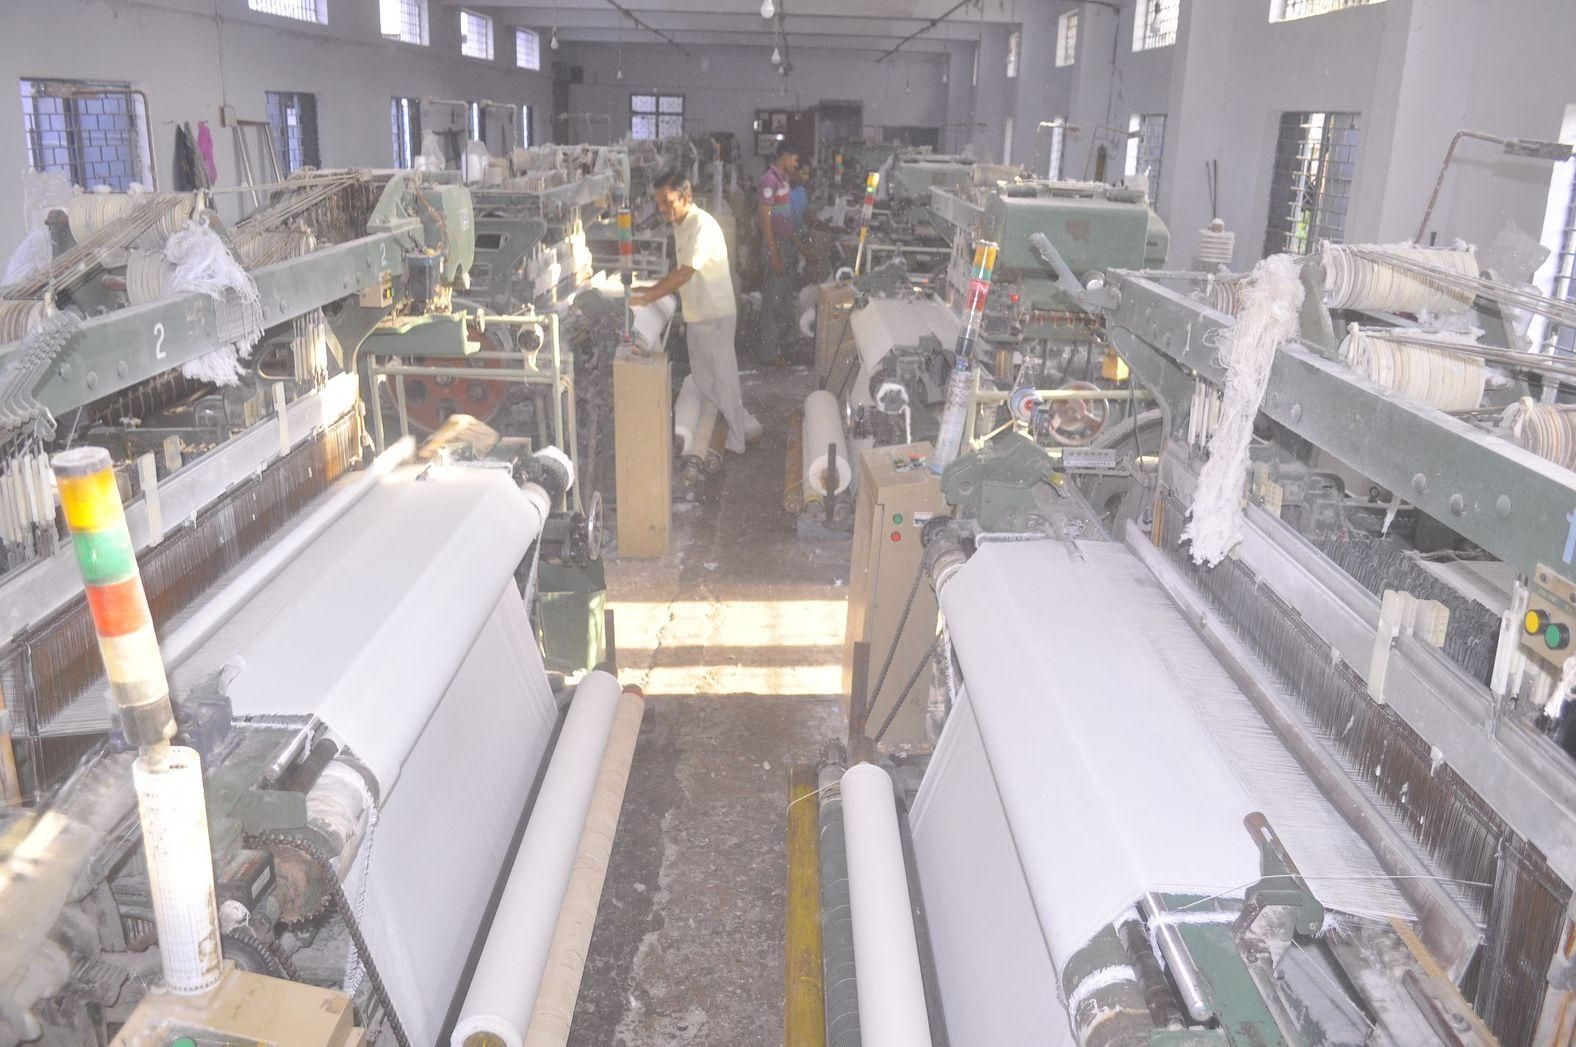  Textile industry felt corona virus, production reduced, helplessness in low wages